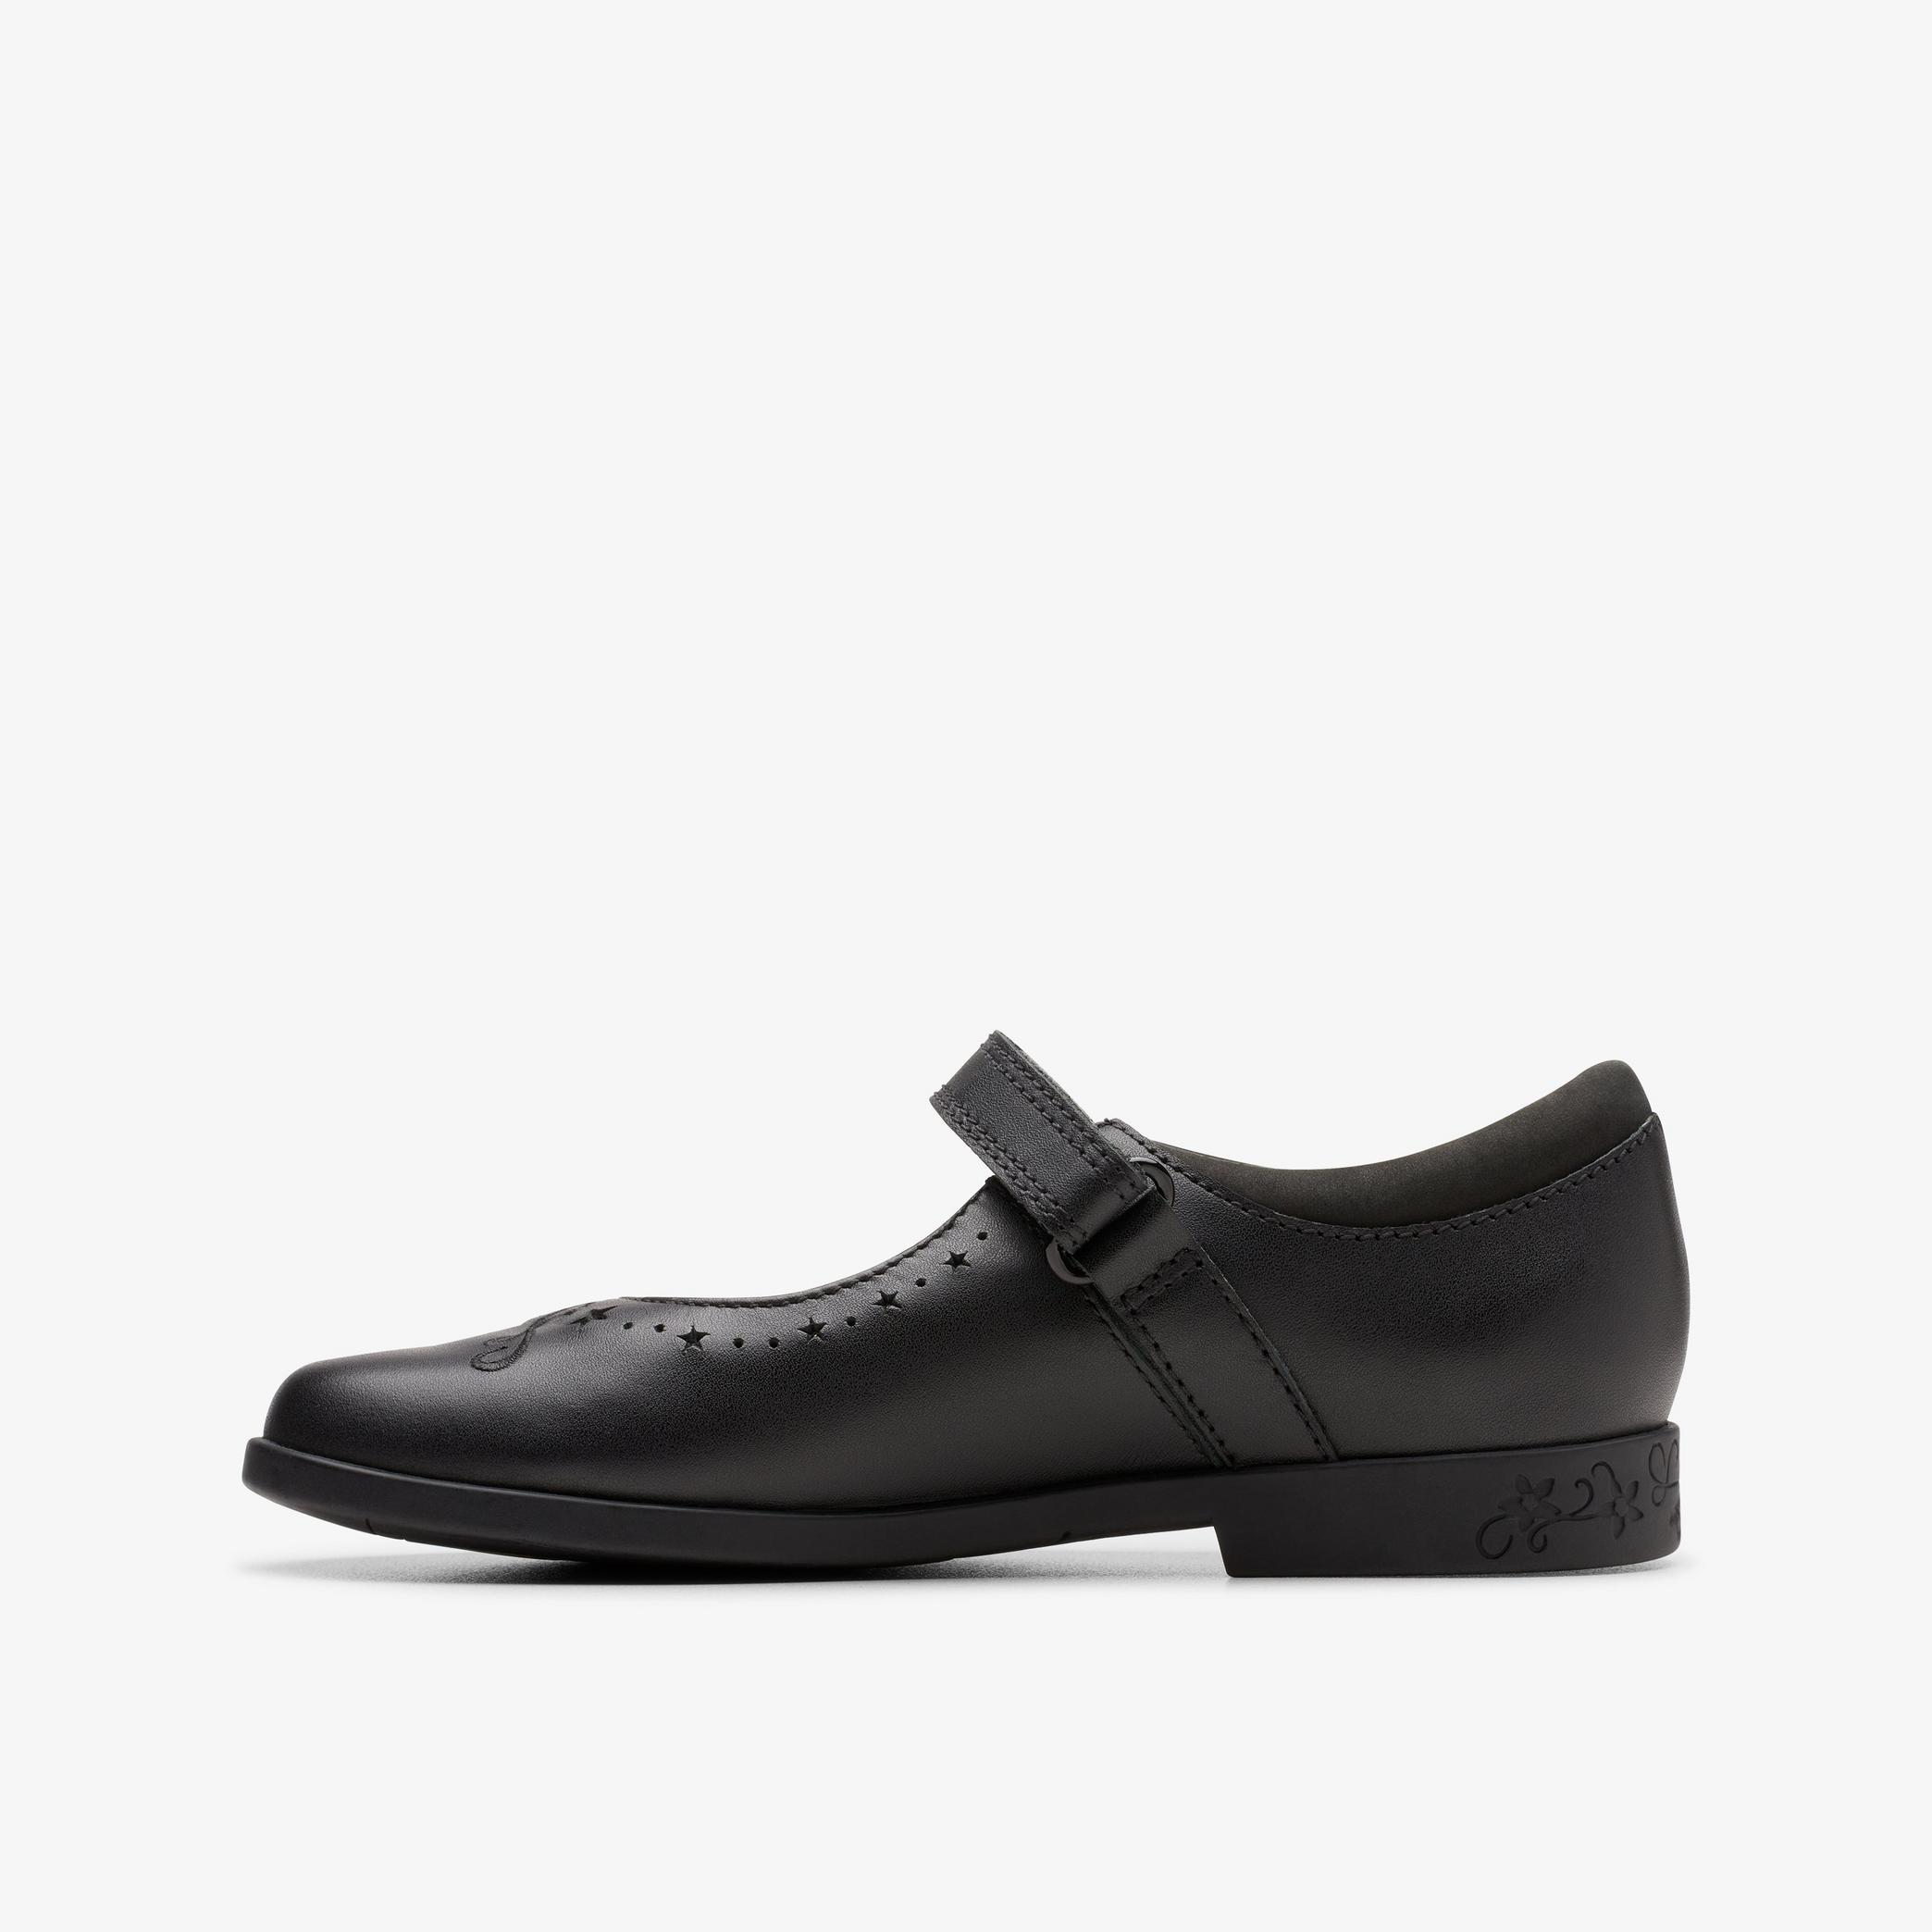 Lock Magic Kid Black Leather Bar Shoes, view 2 of 7